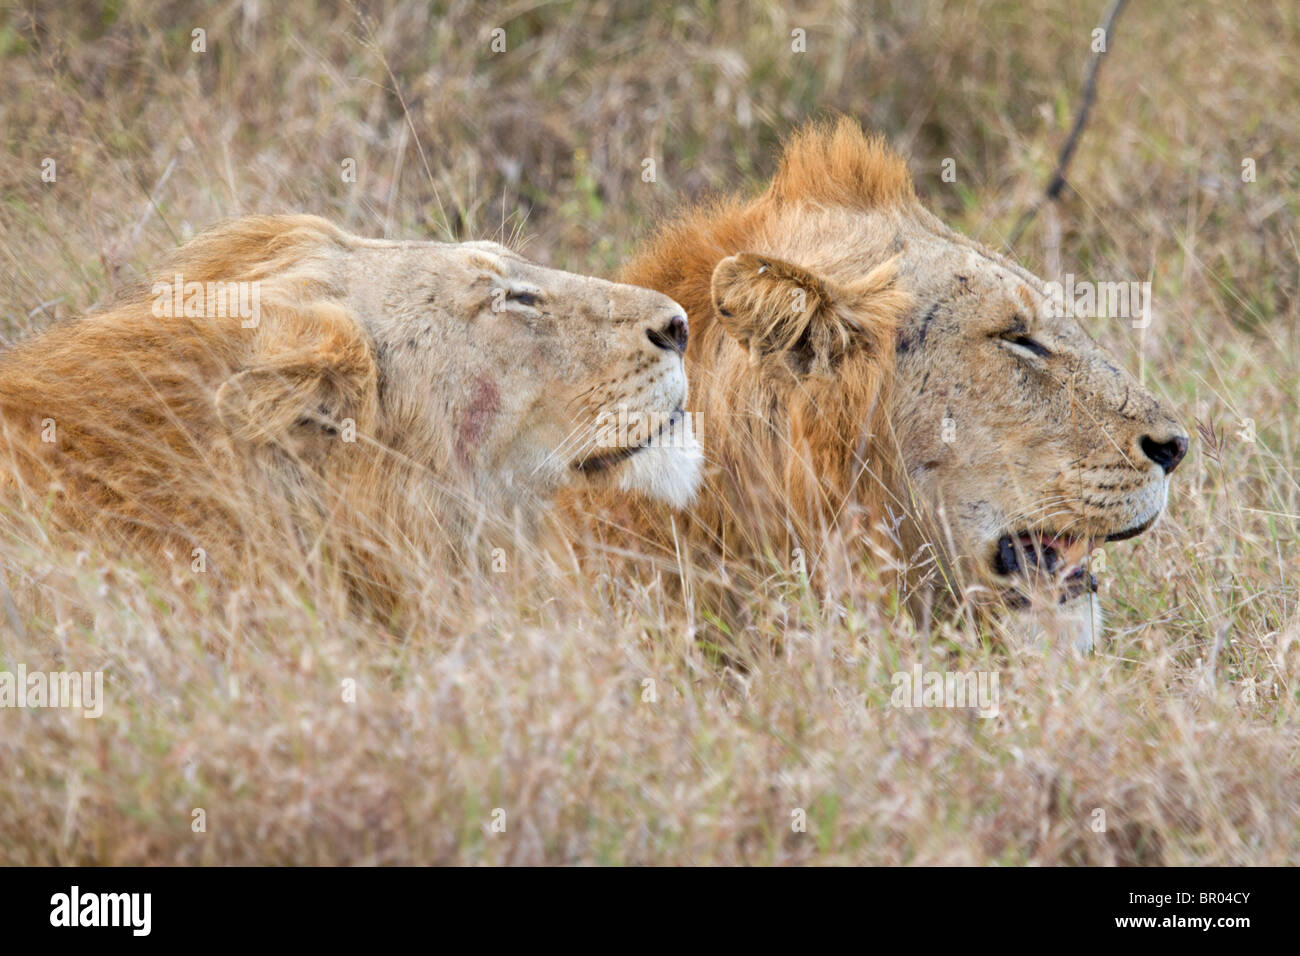 Two young male African Lions (Panthera Leo) resting following a hunting session, Kruger National Park, South Africa Stock Photo